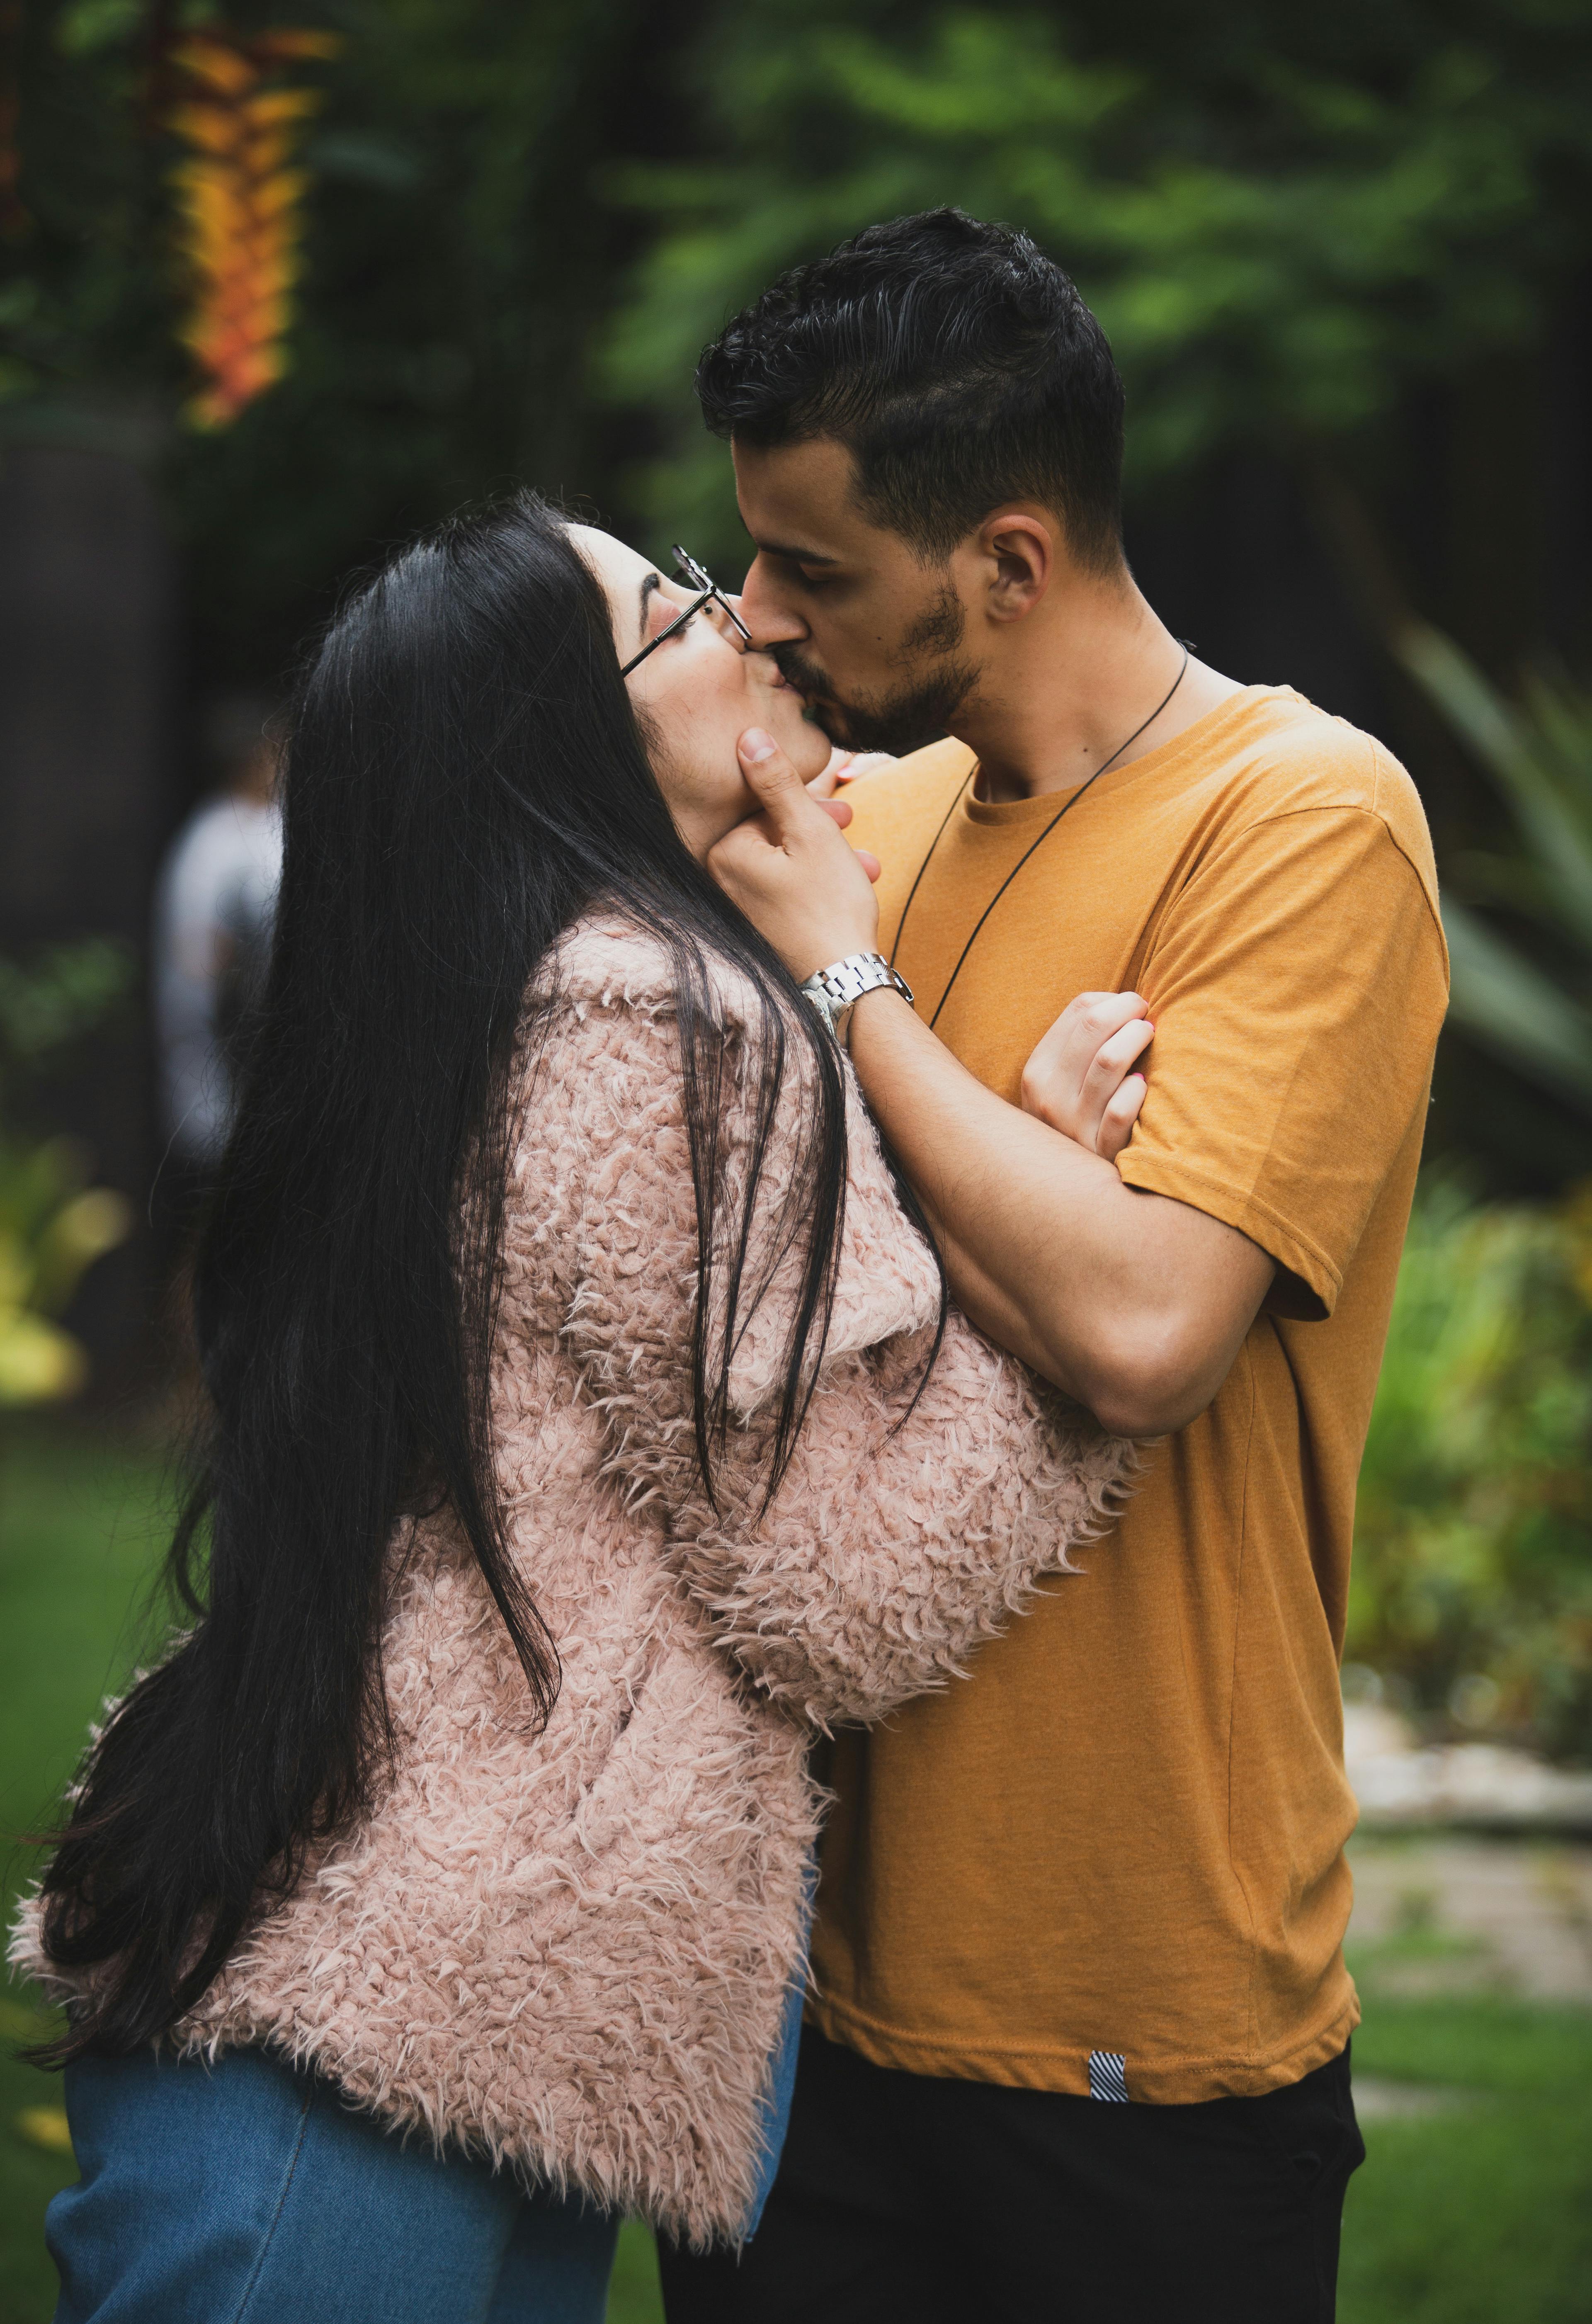 𝐋𝐨𝐰𝐊𝐞𝐲 Couple Poses | Gallery posted by Alyssa Johnson | Lemon8